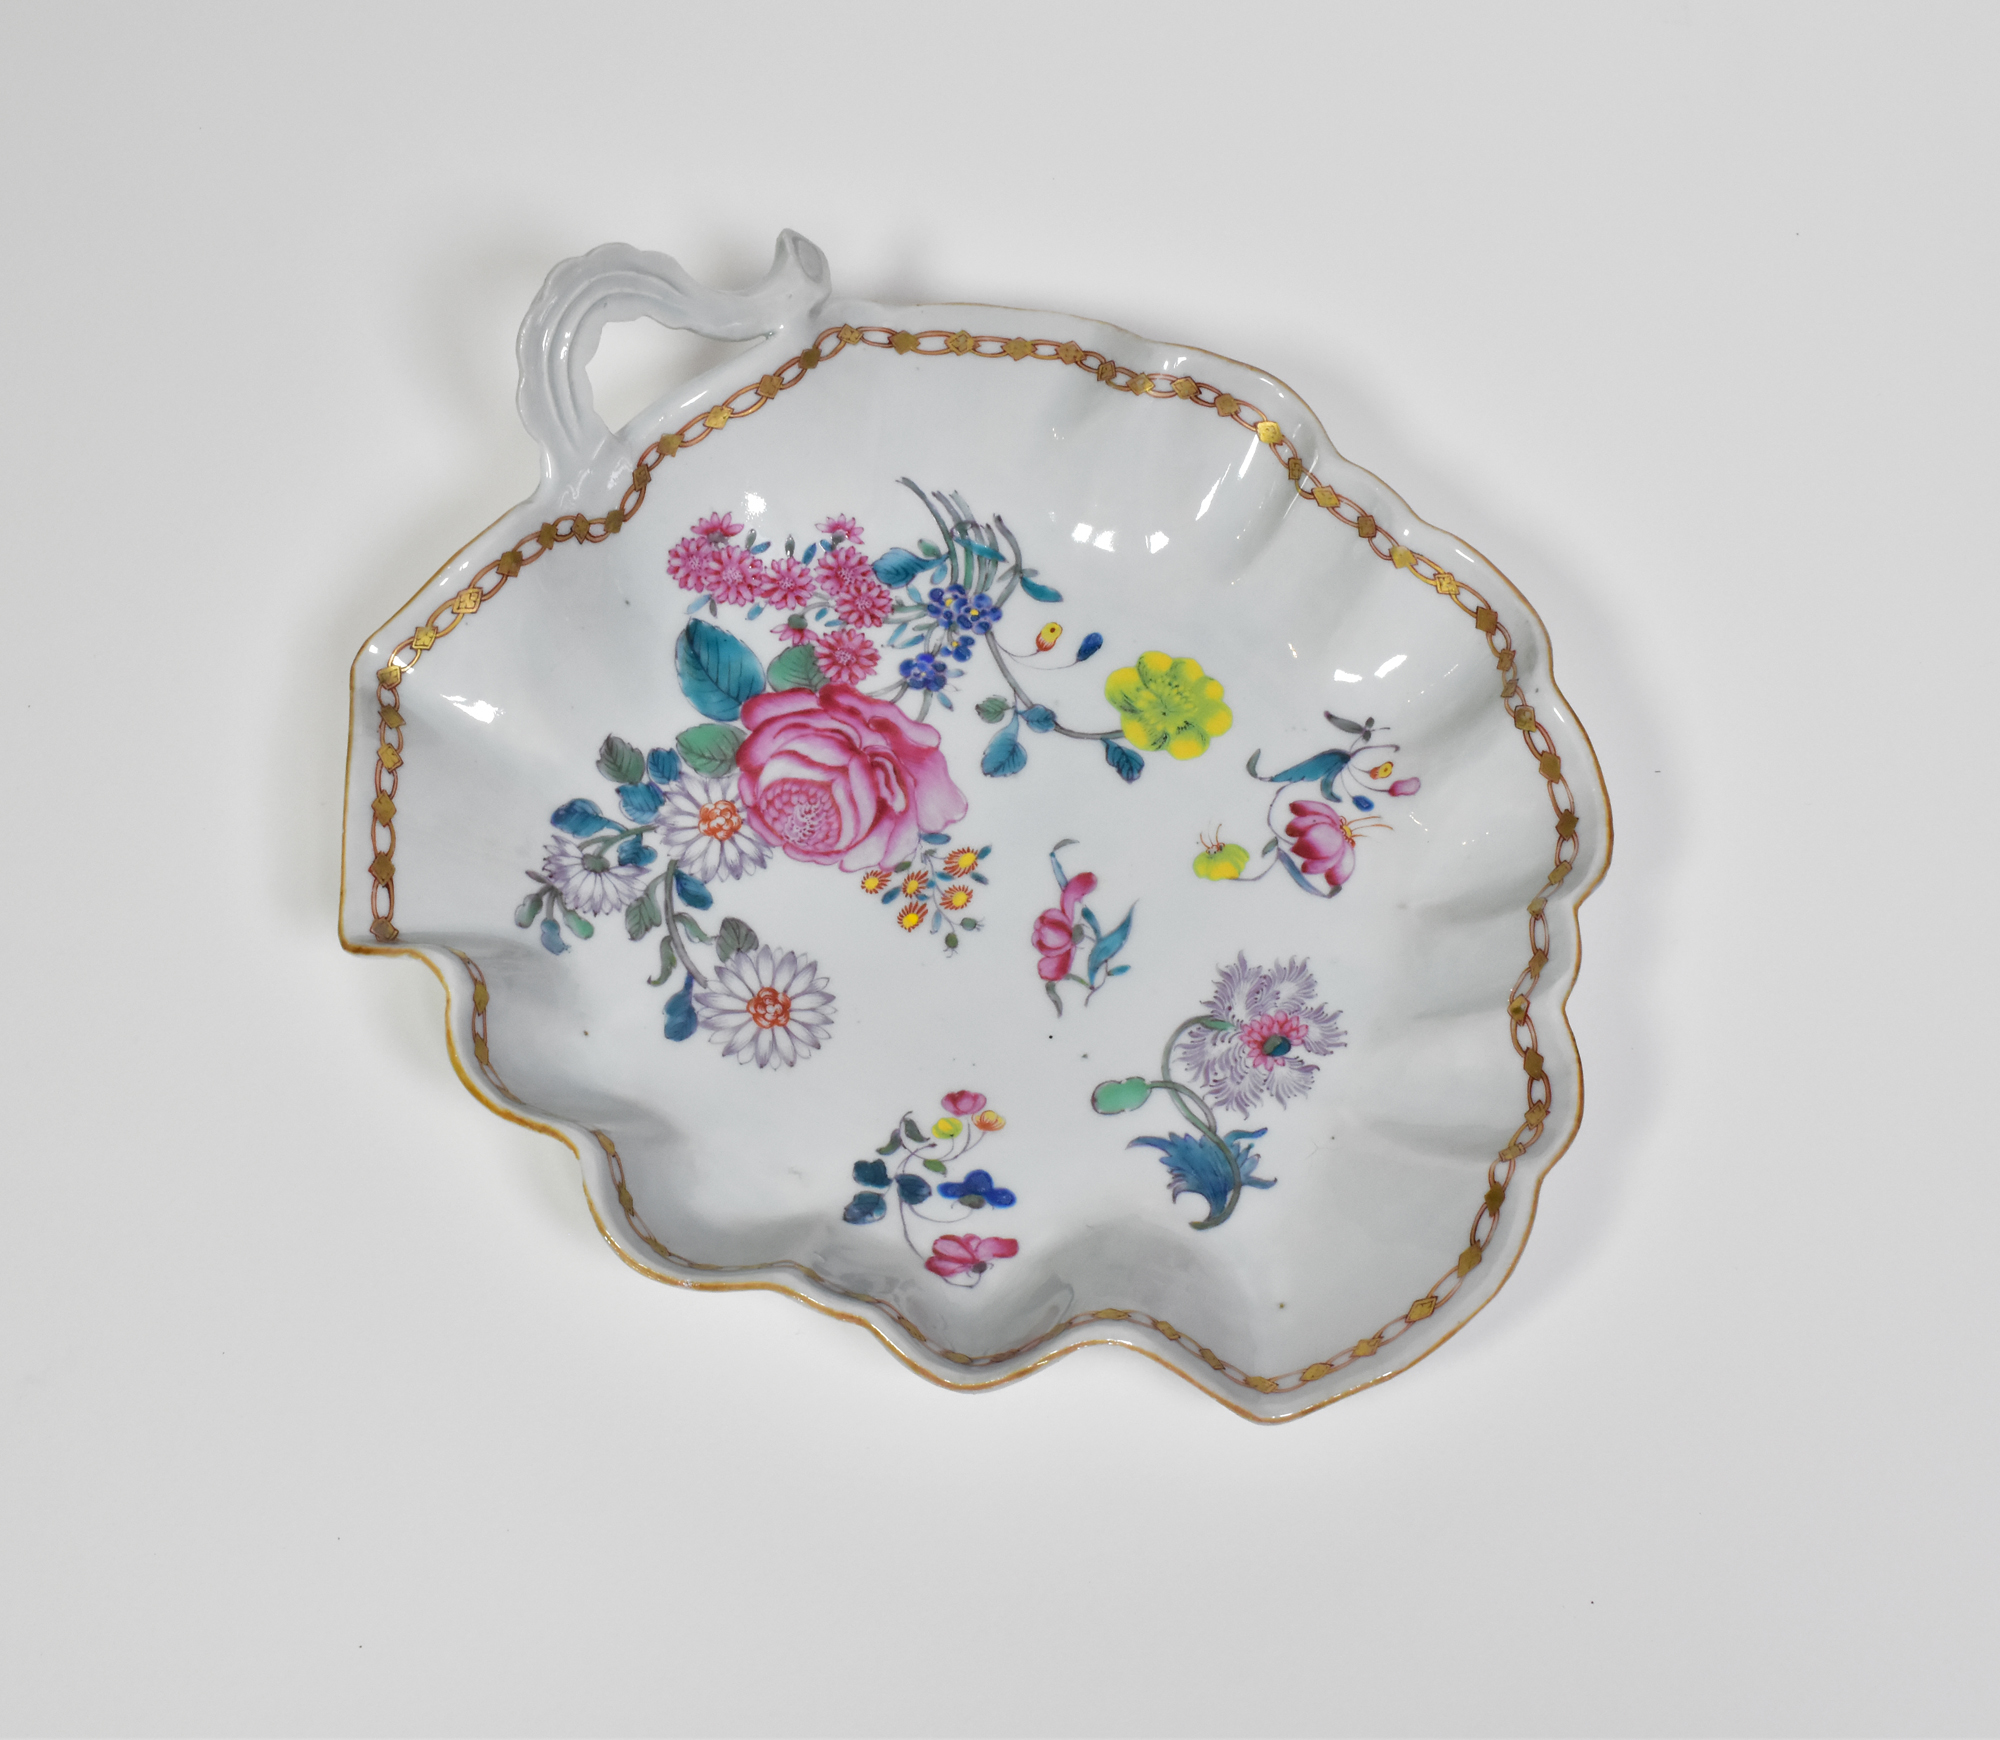 A CHINESE EXPORT ‘FAMILLE-ROSE’ PORCELAIN LEAF-SHAPED DISH, QIANLONG PERIOD, 1736 - 1795